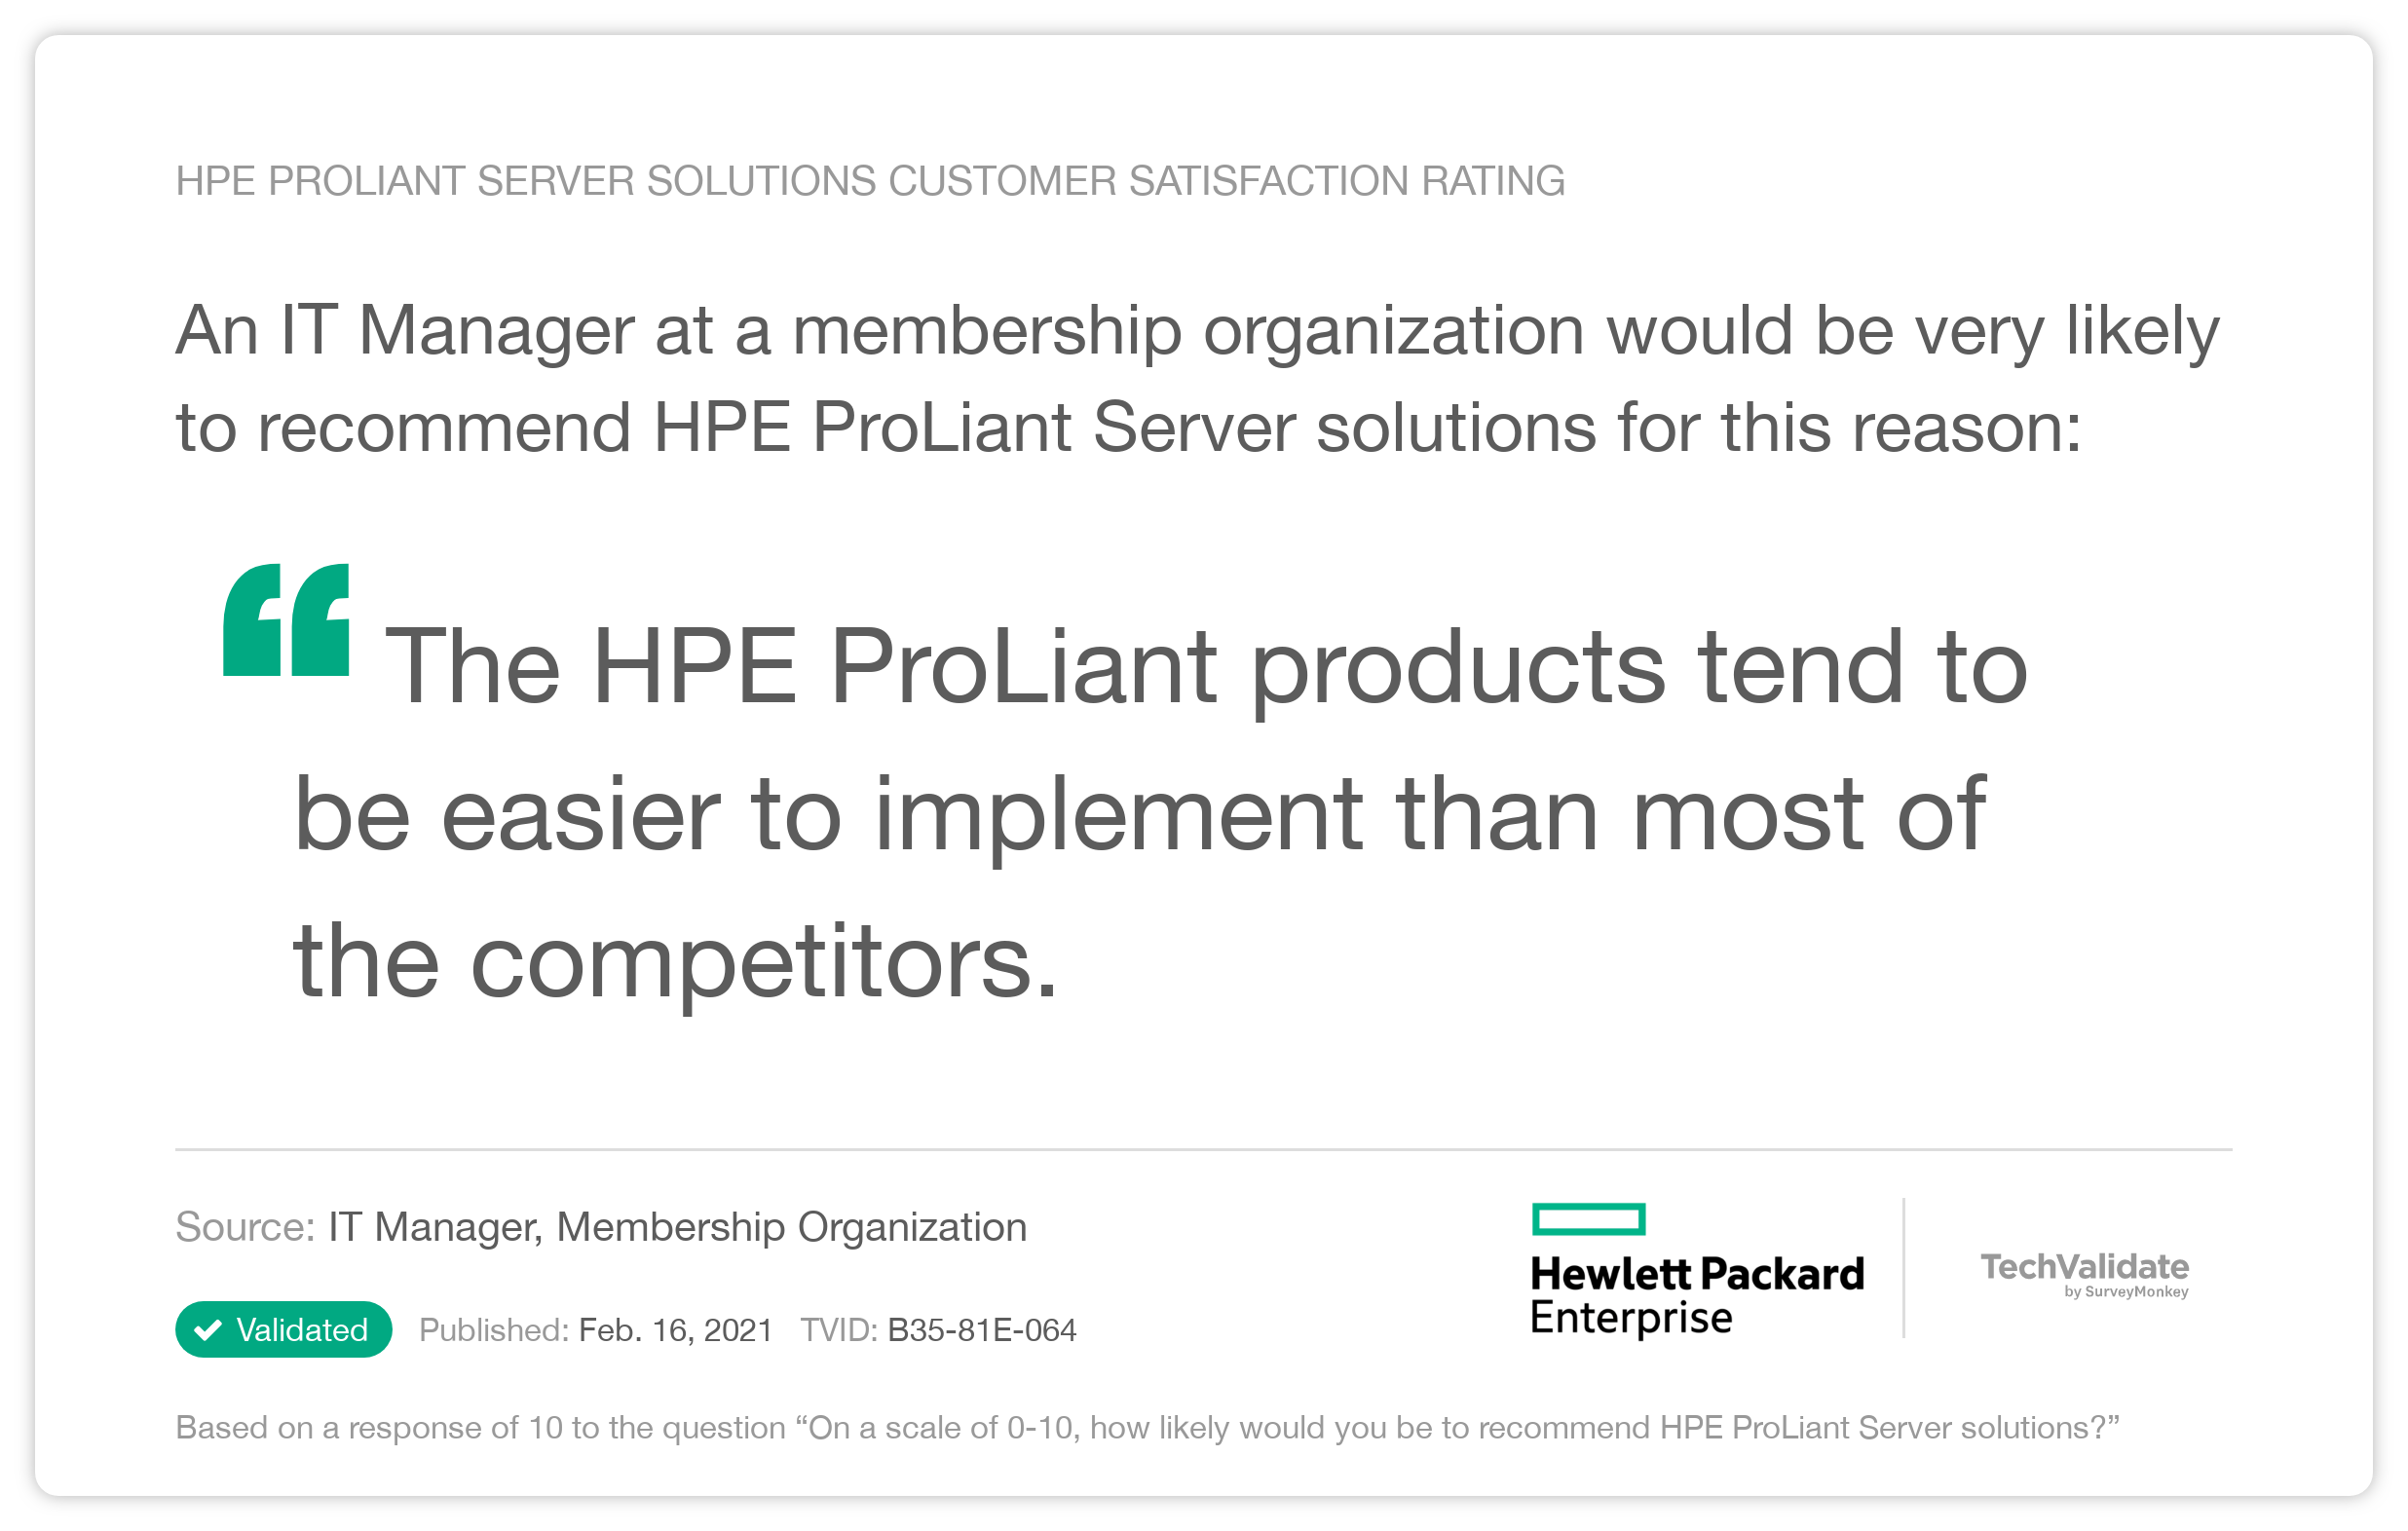 HPE ProLiant Server solutions Customer Satisfaction Rating